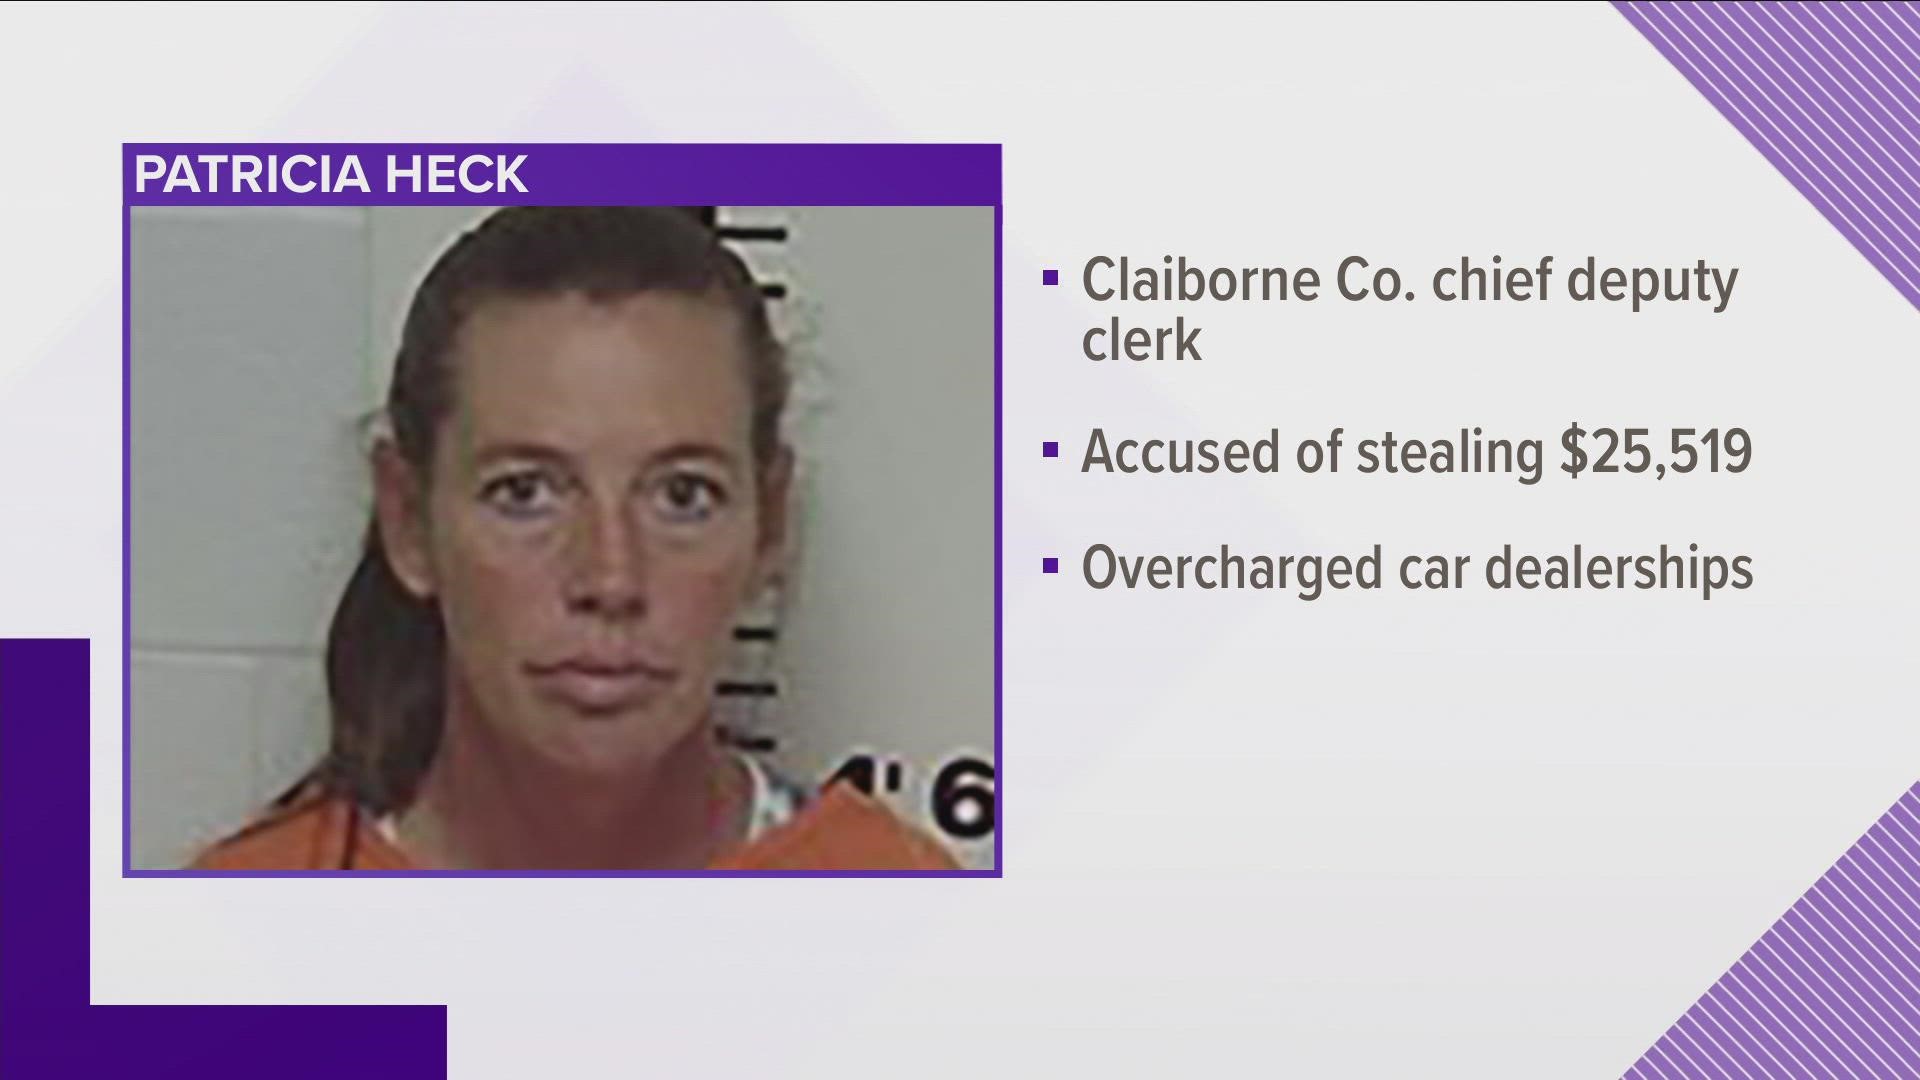 A former Claiborne county chief deputy clerk is accused of stealing more than $25,000.